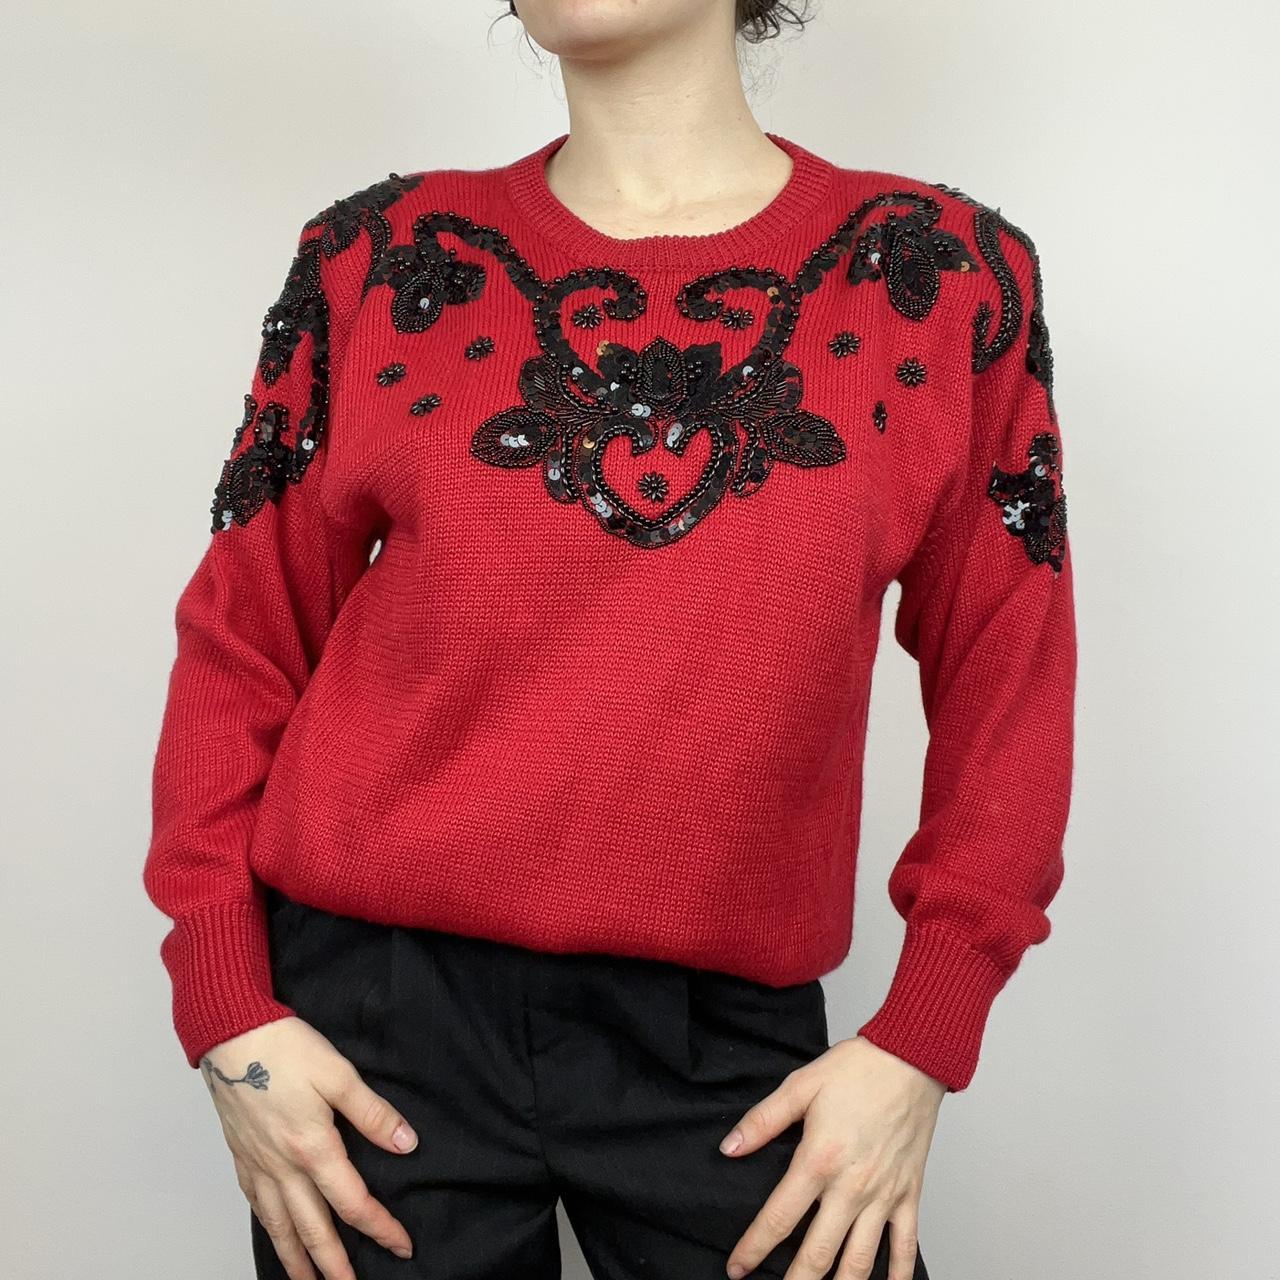 insane vintage 80’s embellished sweater, cherry red...